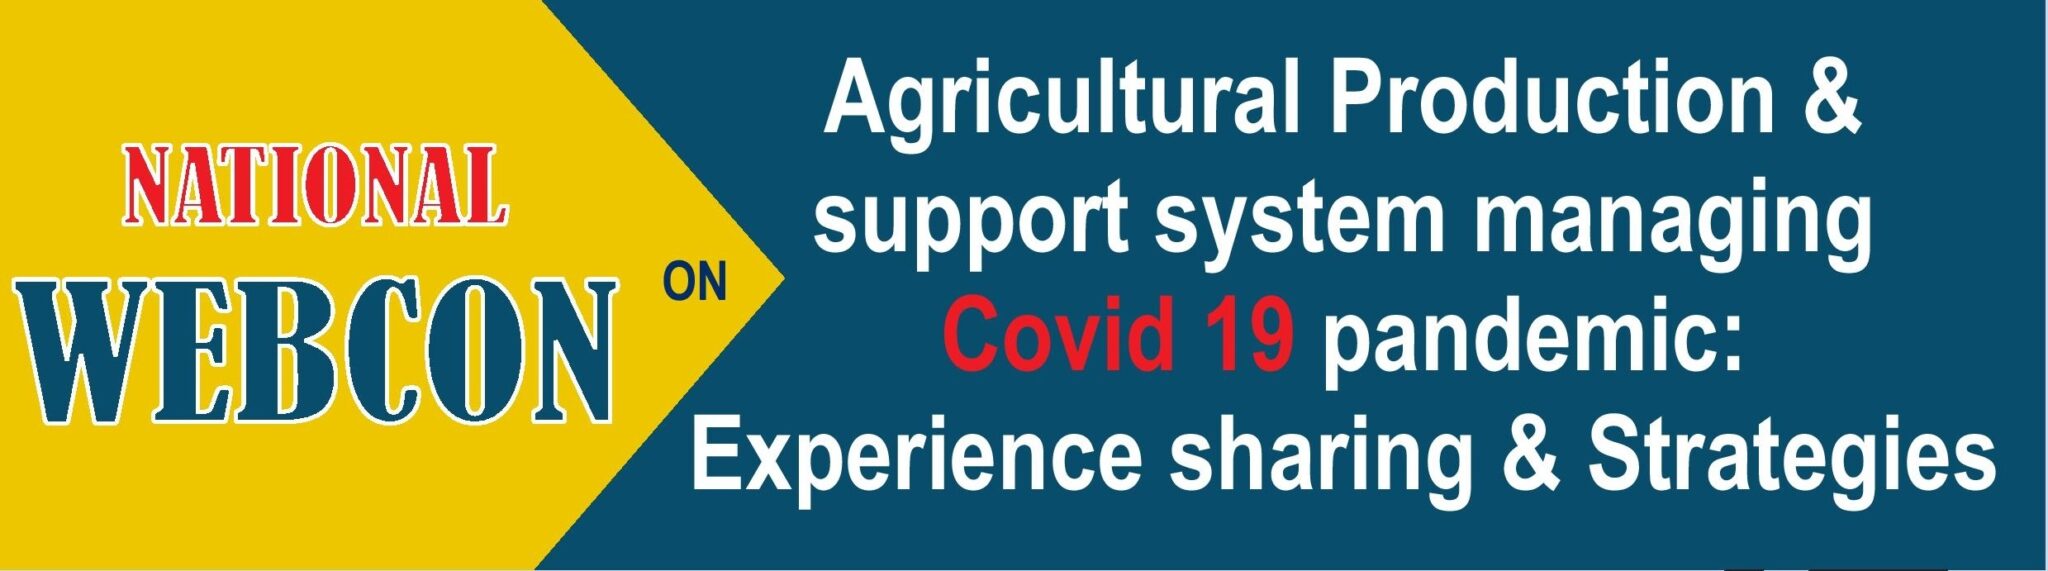 Agricultural Production & support system managing Covid 19 pandemic:Experience sharing & Strategies